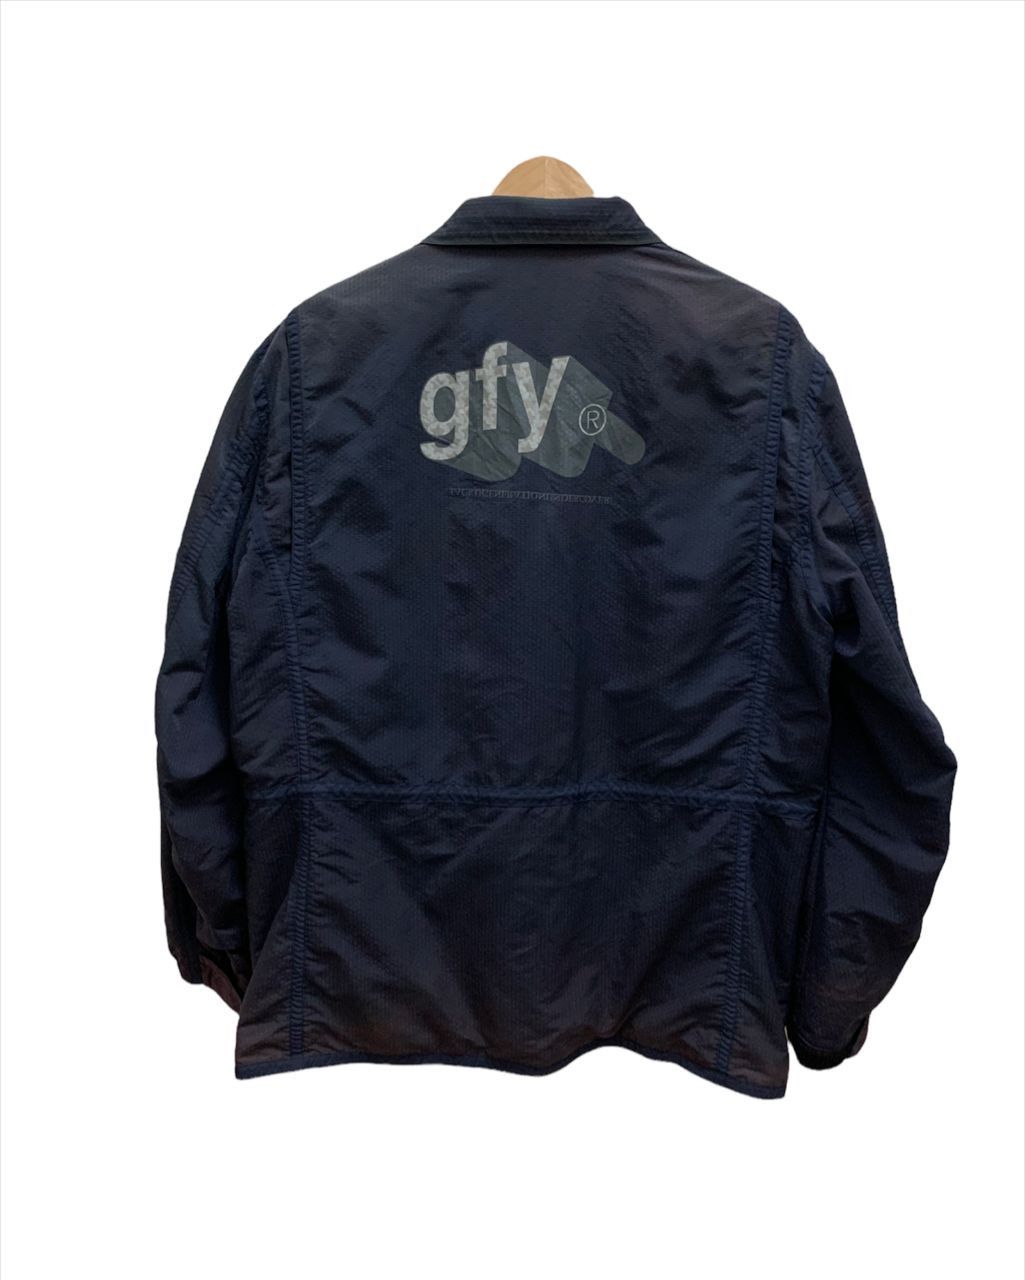 AW01 Undercover “Generation Fuck You” GFY M-65 Jacket - 1